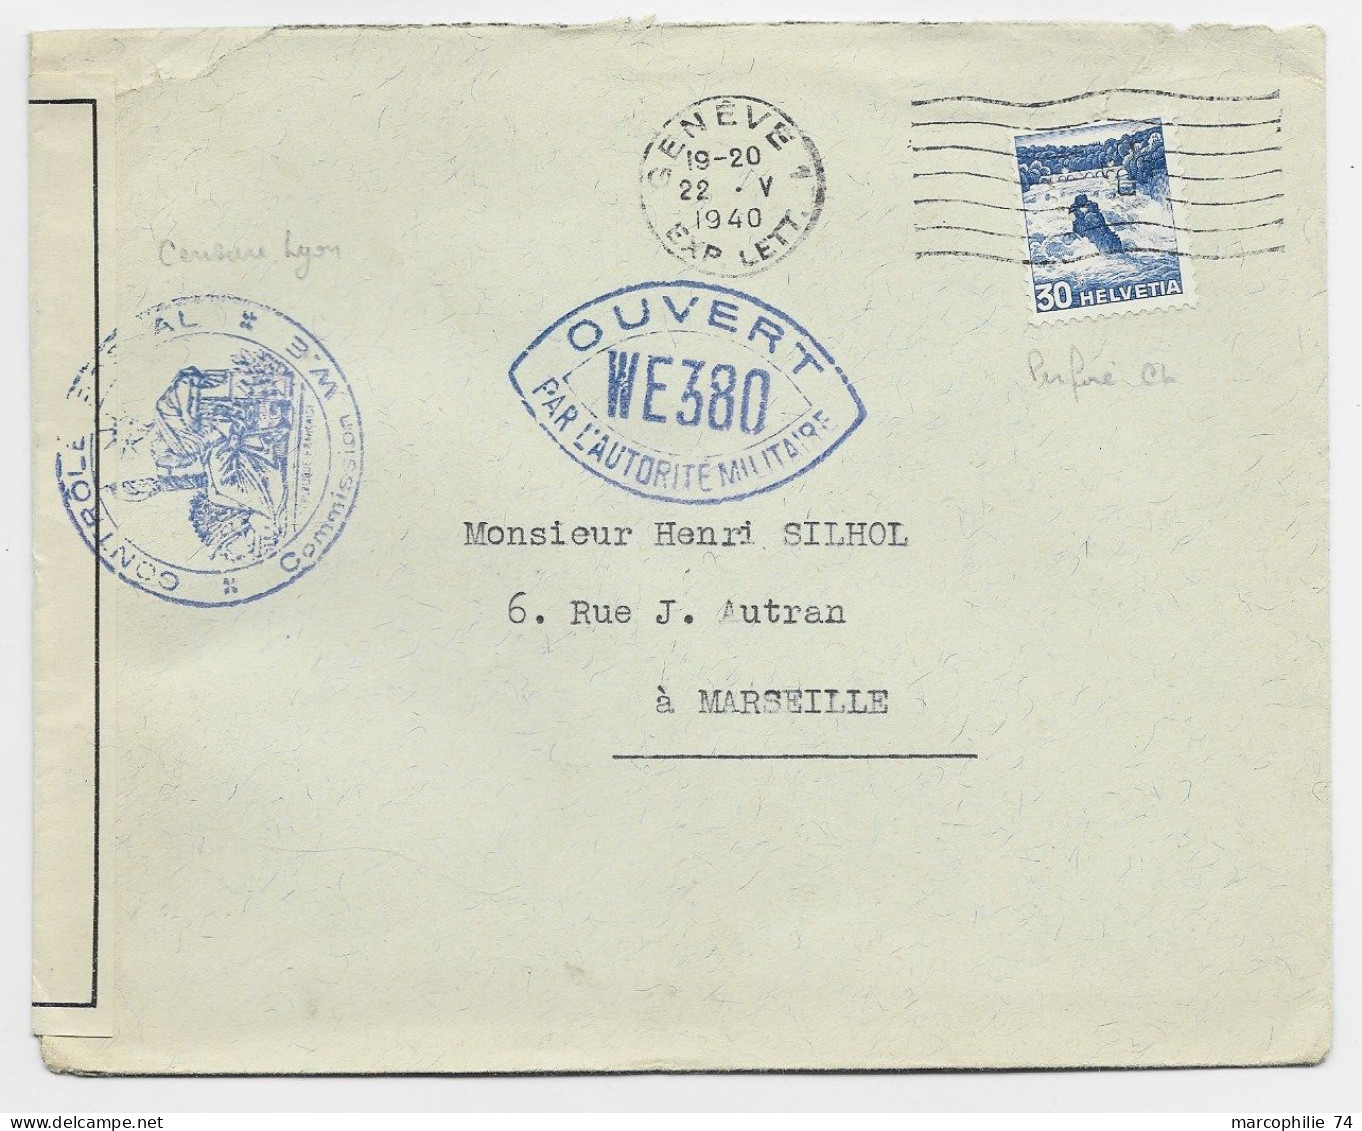 SUISSE HELVETIA 30C PERFIN PERFORE C.L. LETTRE COVER MEC GENEVE 22.V.1940 TO FRANCE CENSURE OUVERT WE 380 - Gezähnt (perforiert)